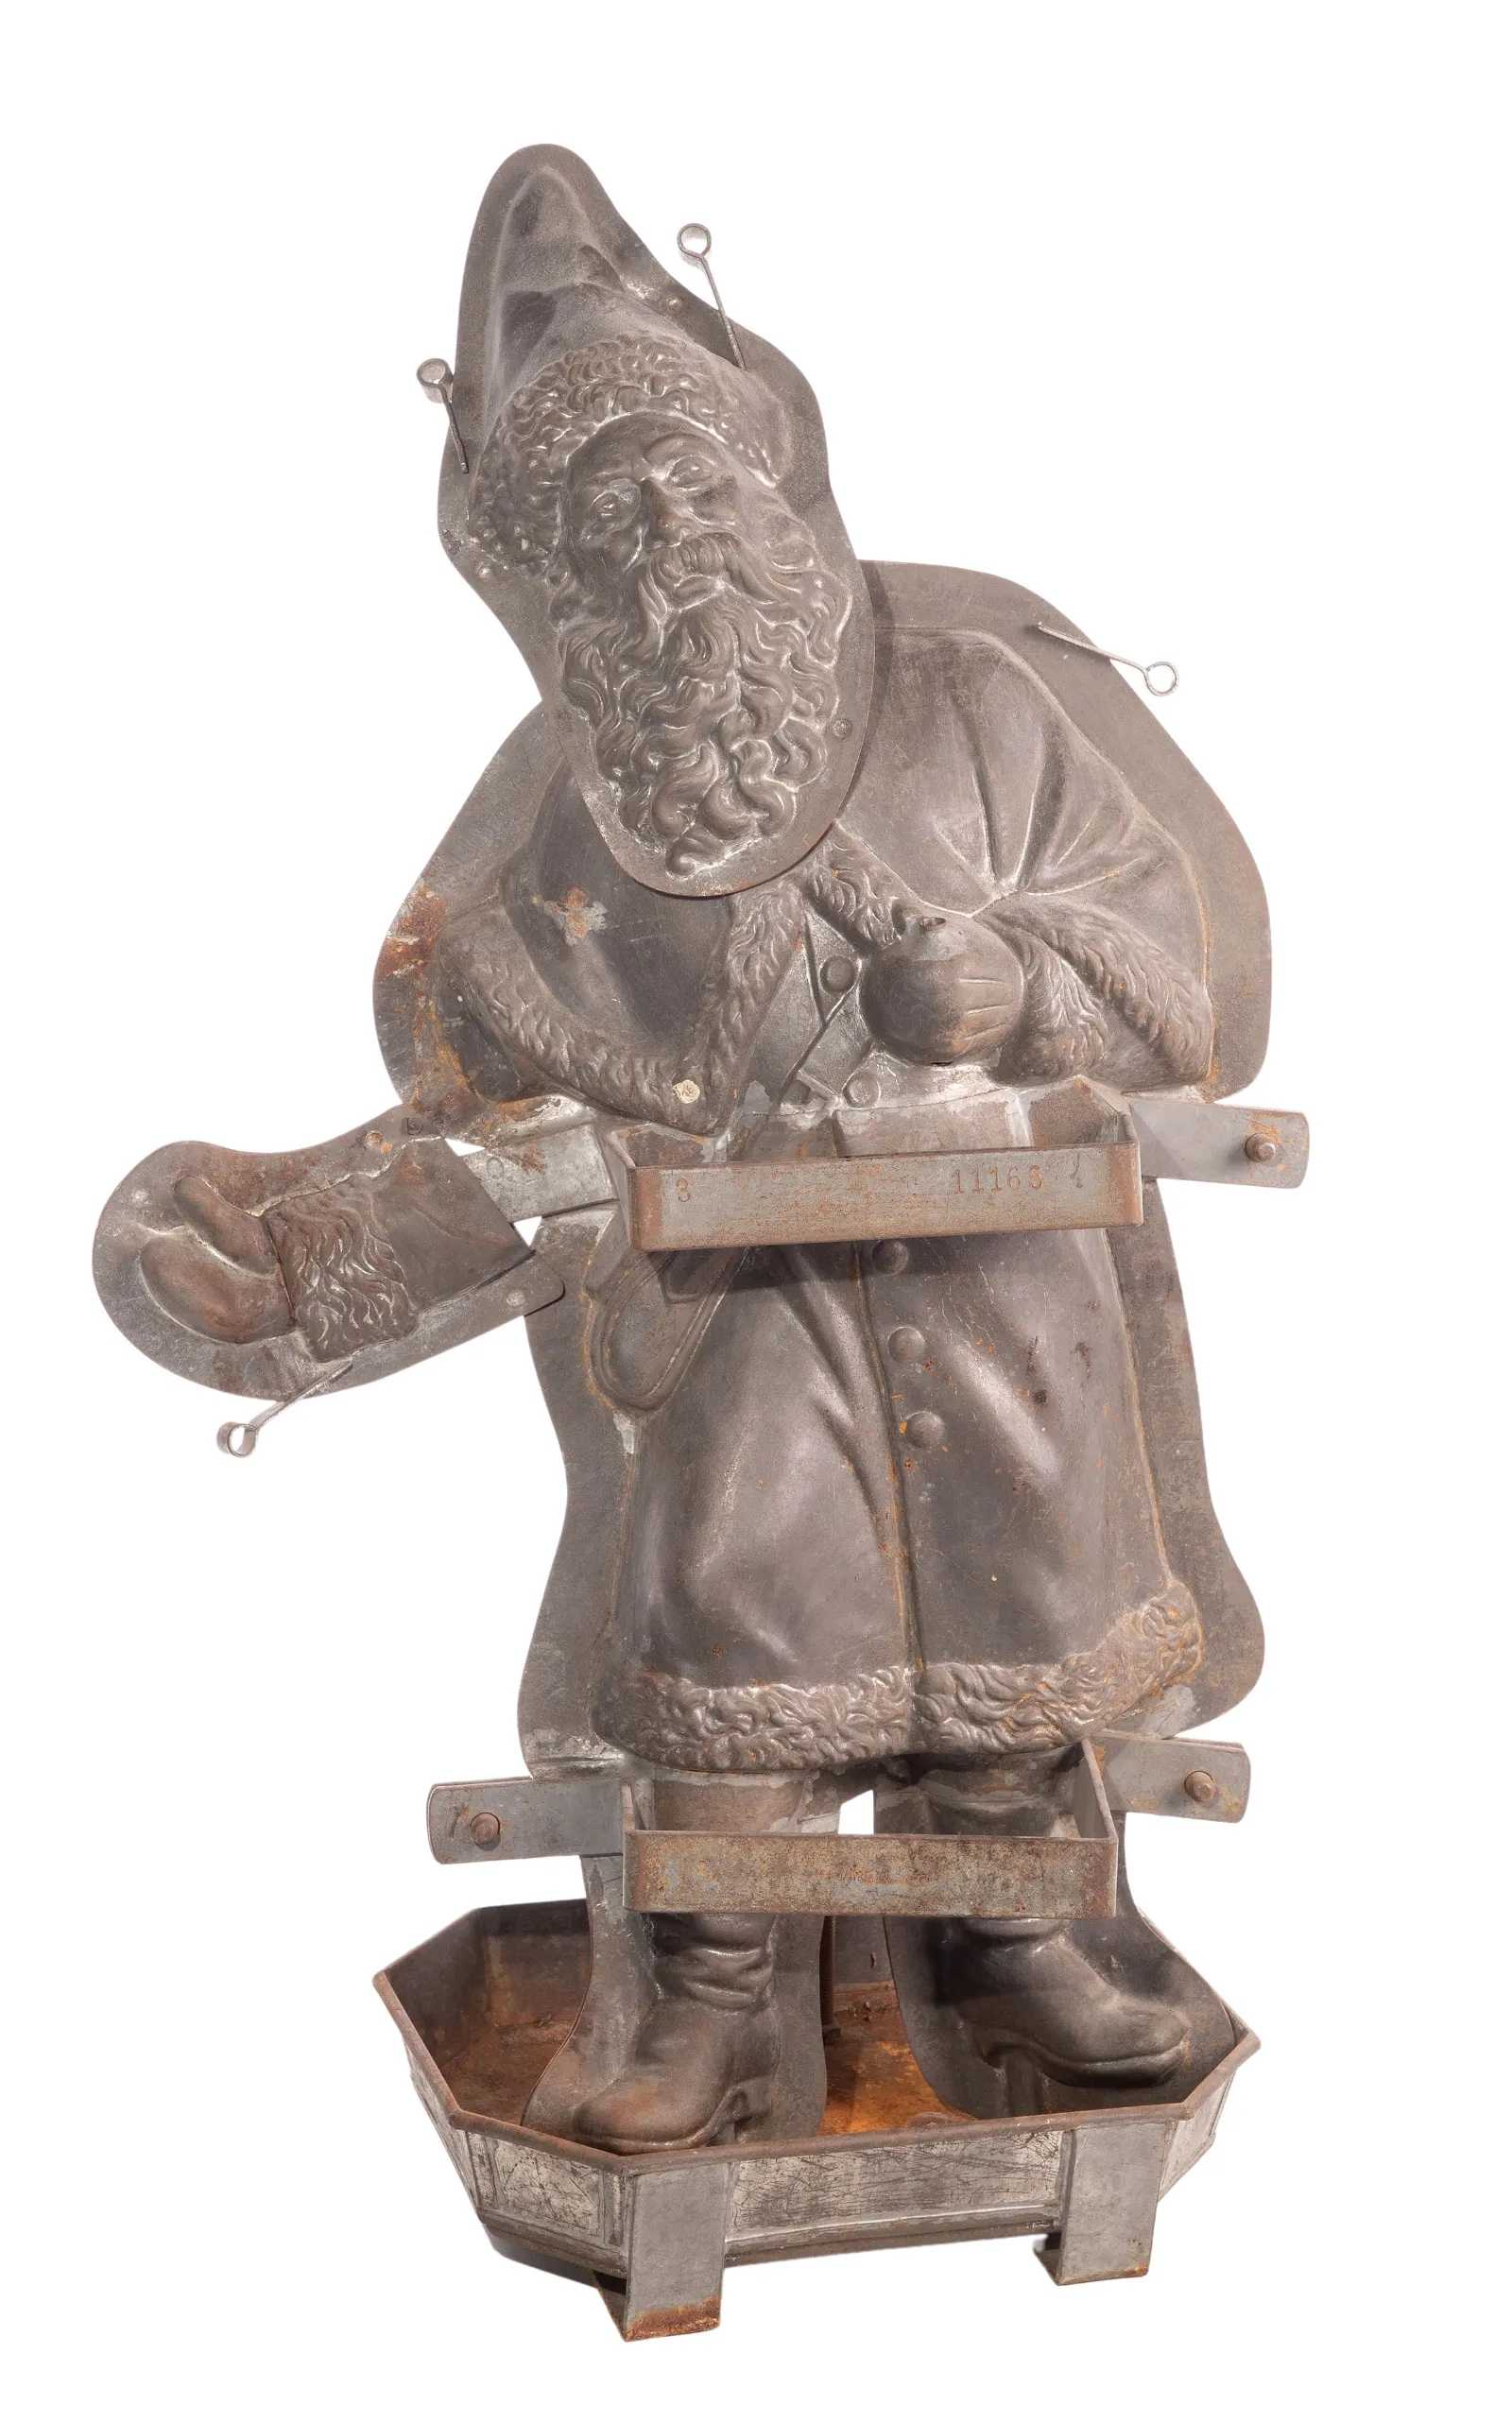 Outsized German figural chocolate molds made sweet numbers at Leonard March 24